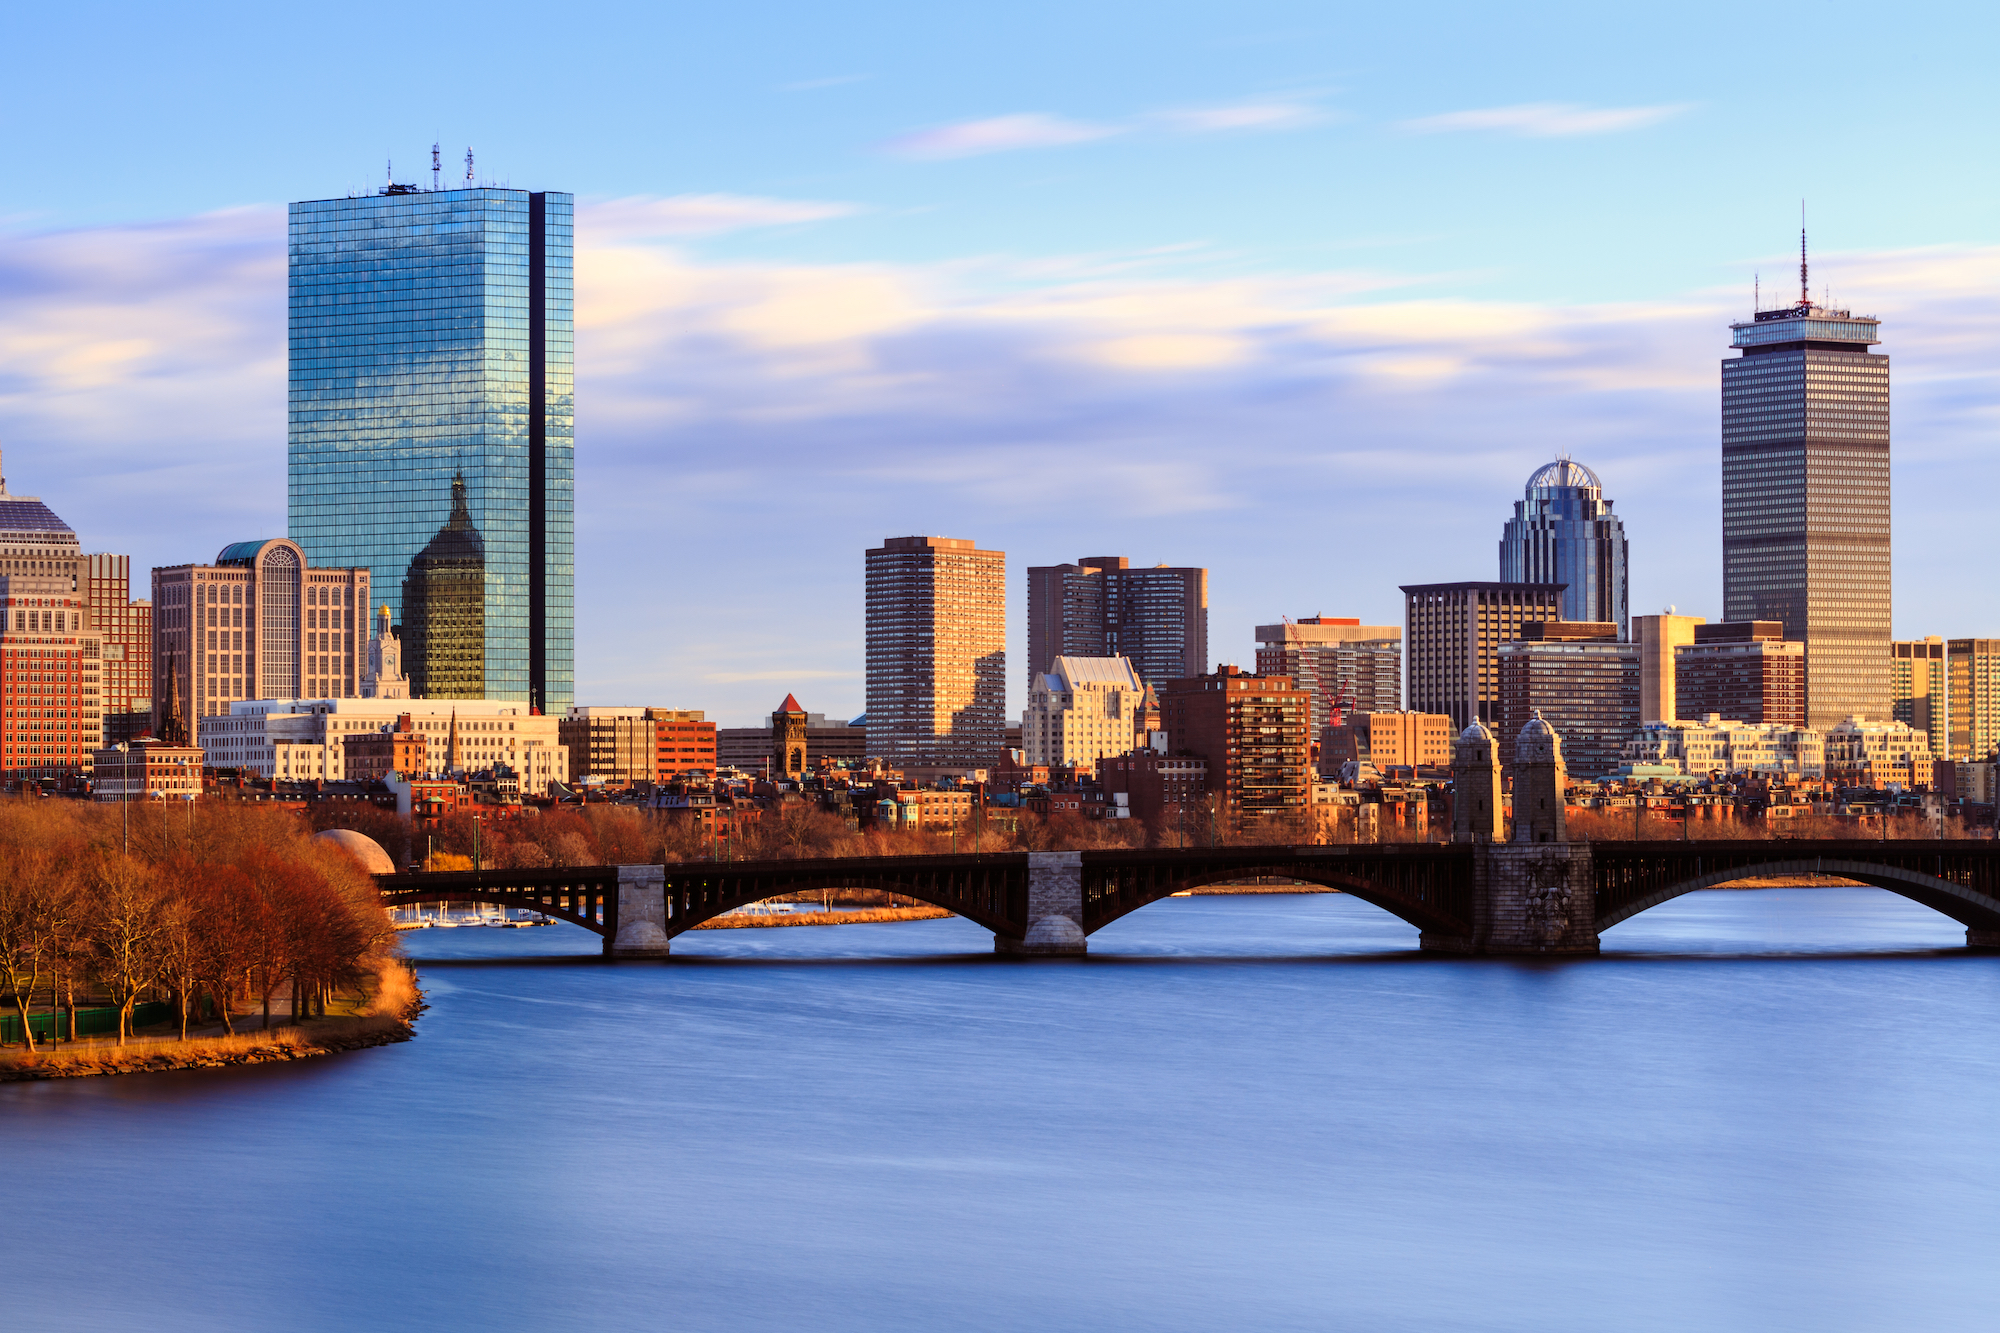 An image of the Boston skyline is shown.